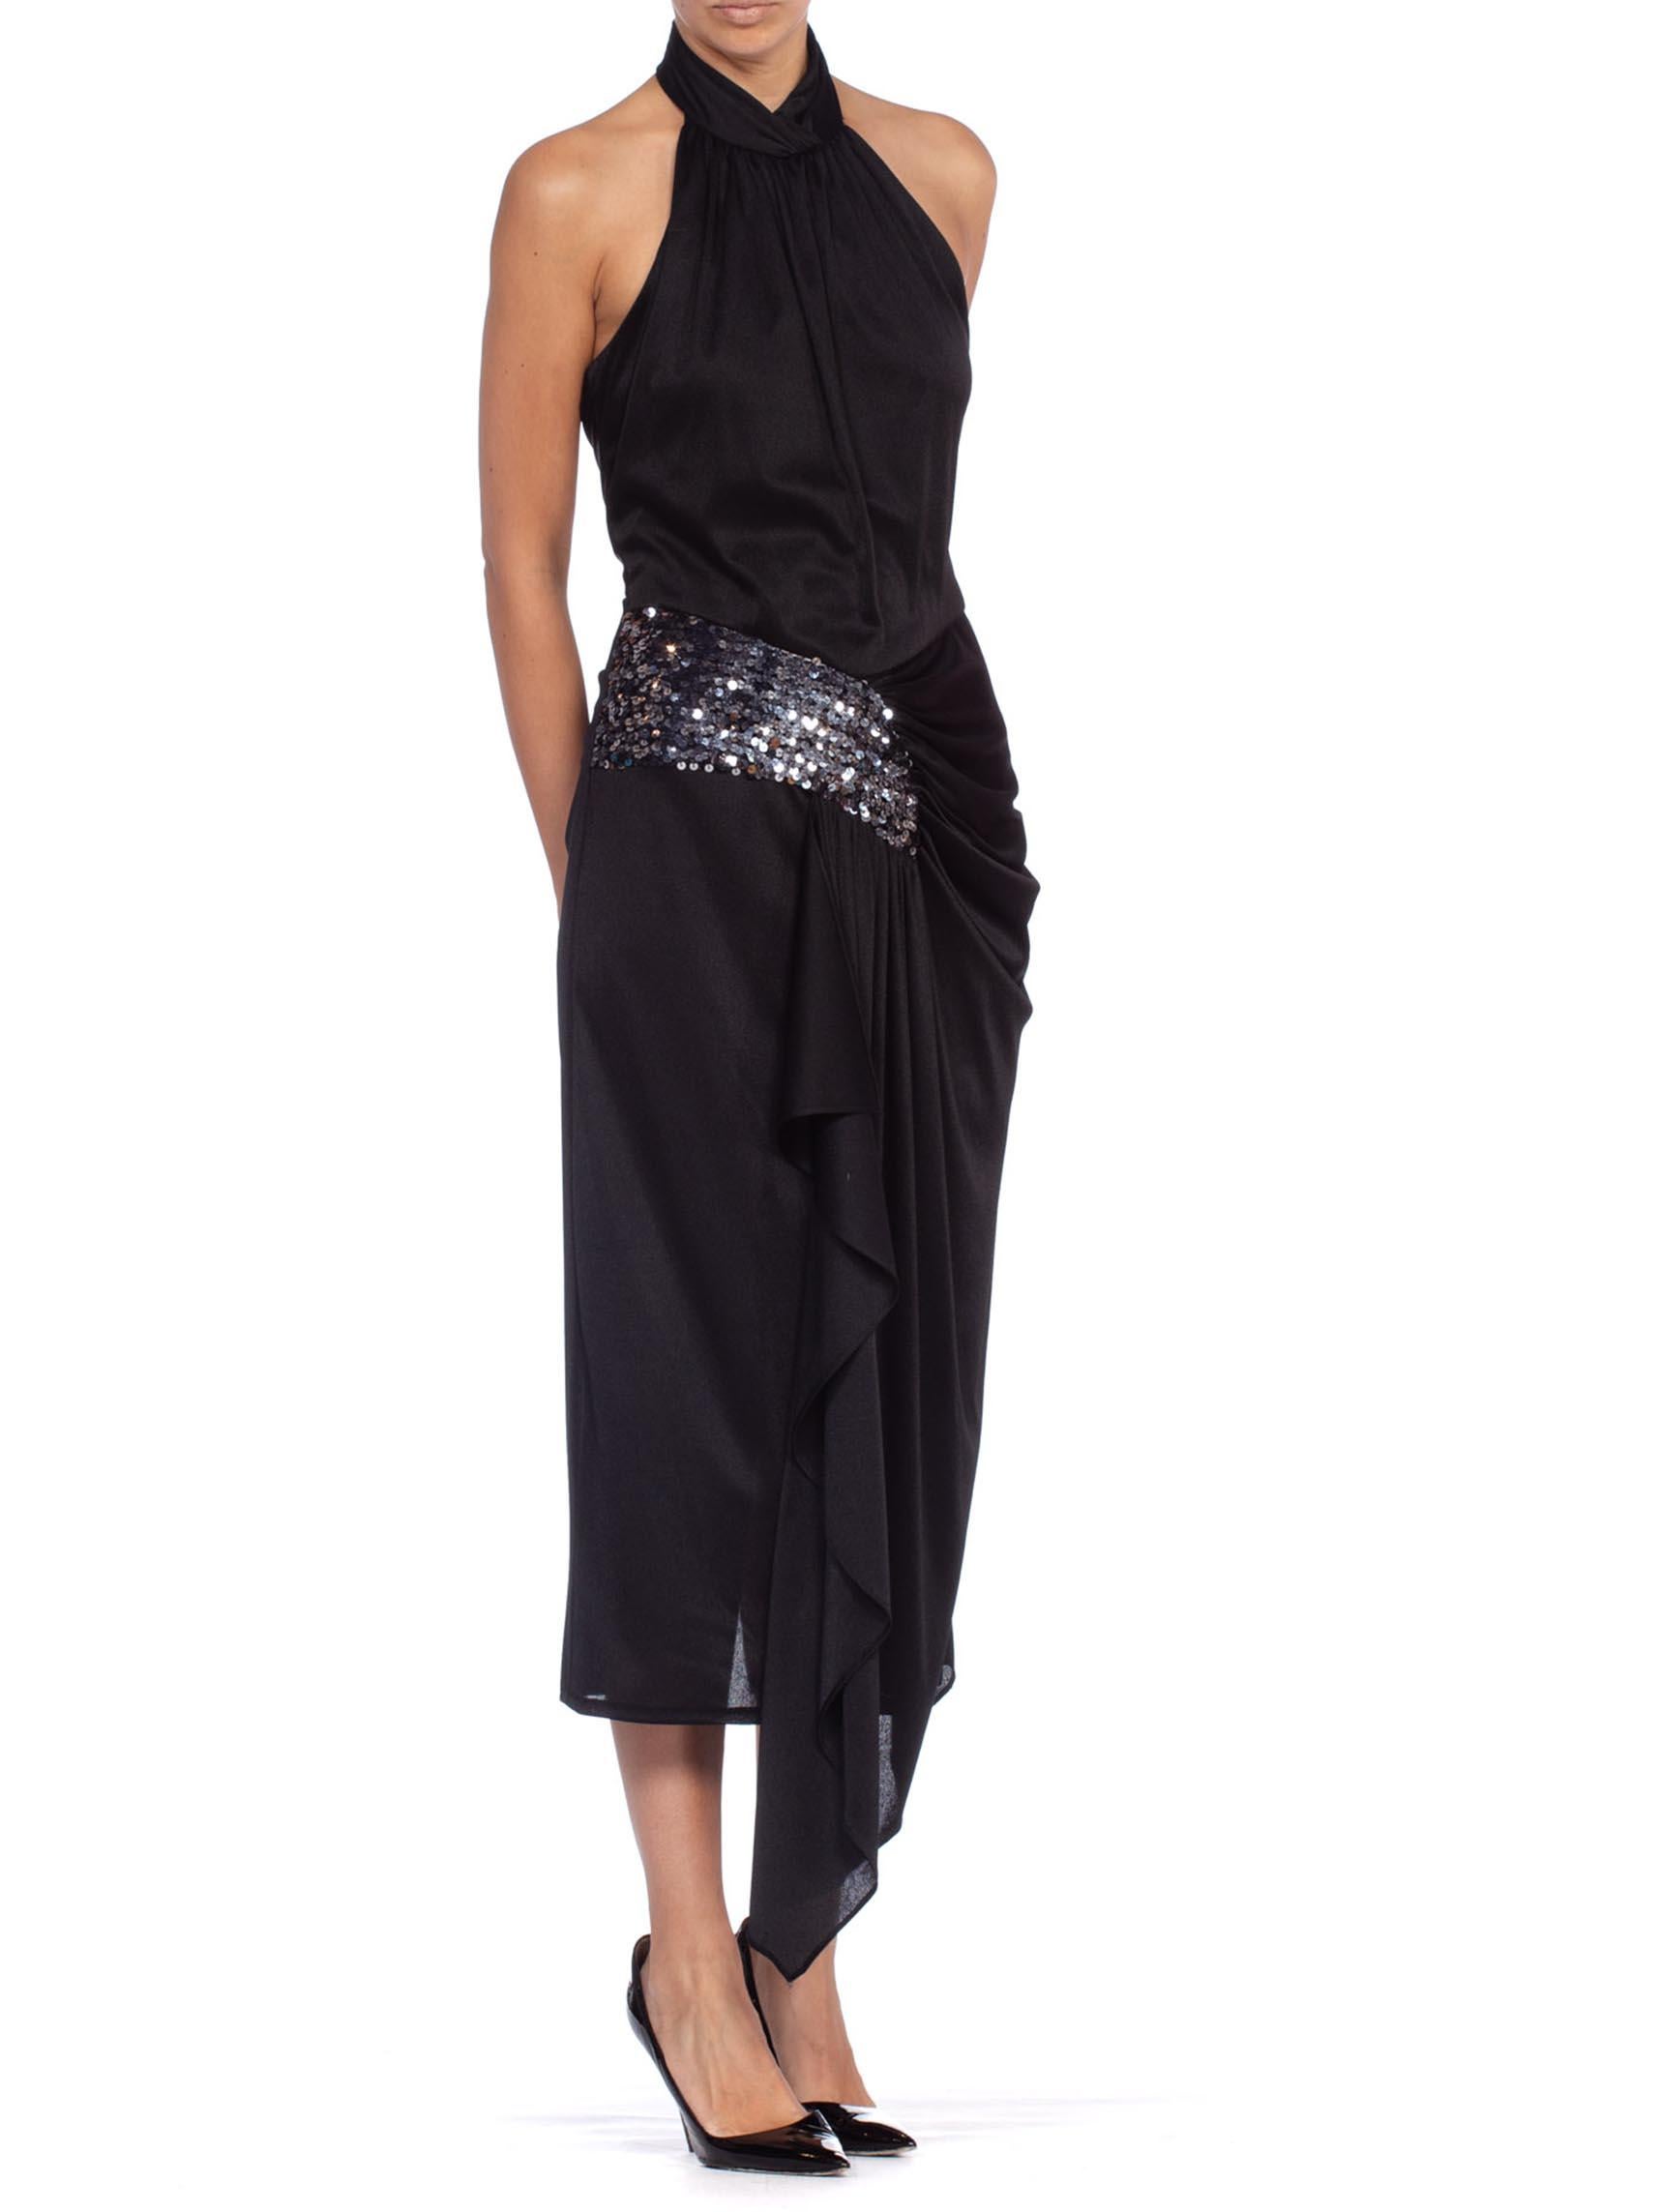 1980'S Black Polyester Jersey Slinky Disco Party Halter Dress With Silver Sequins